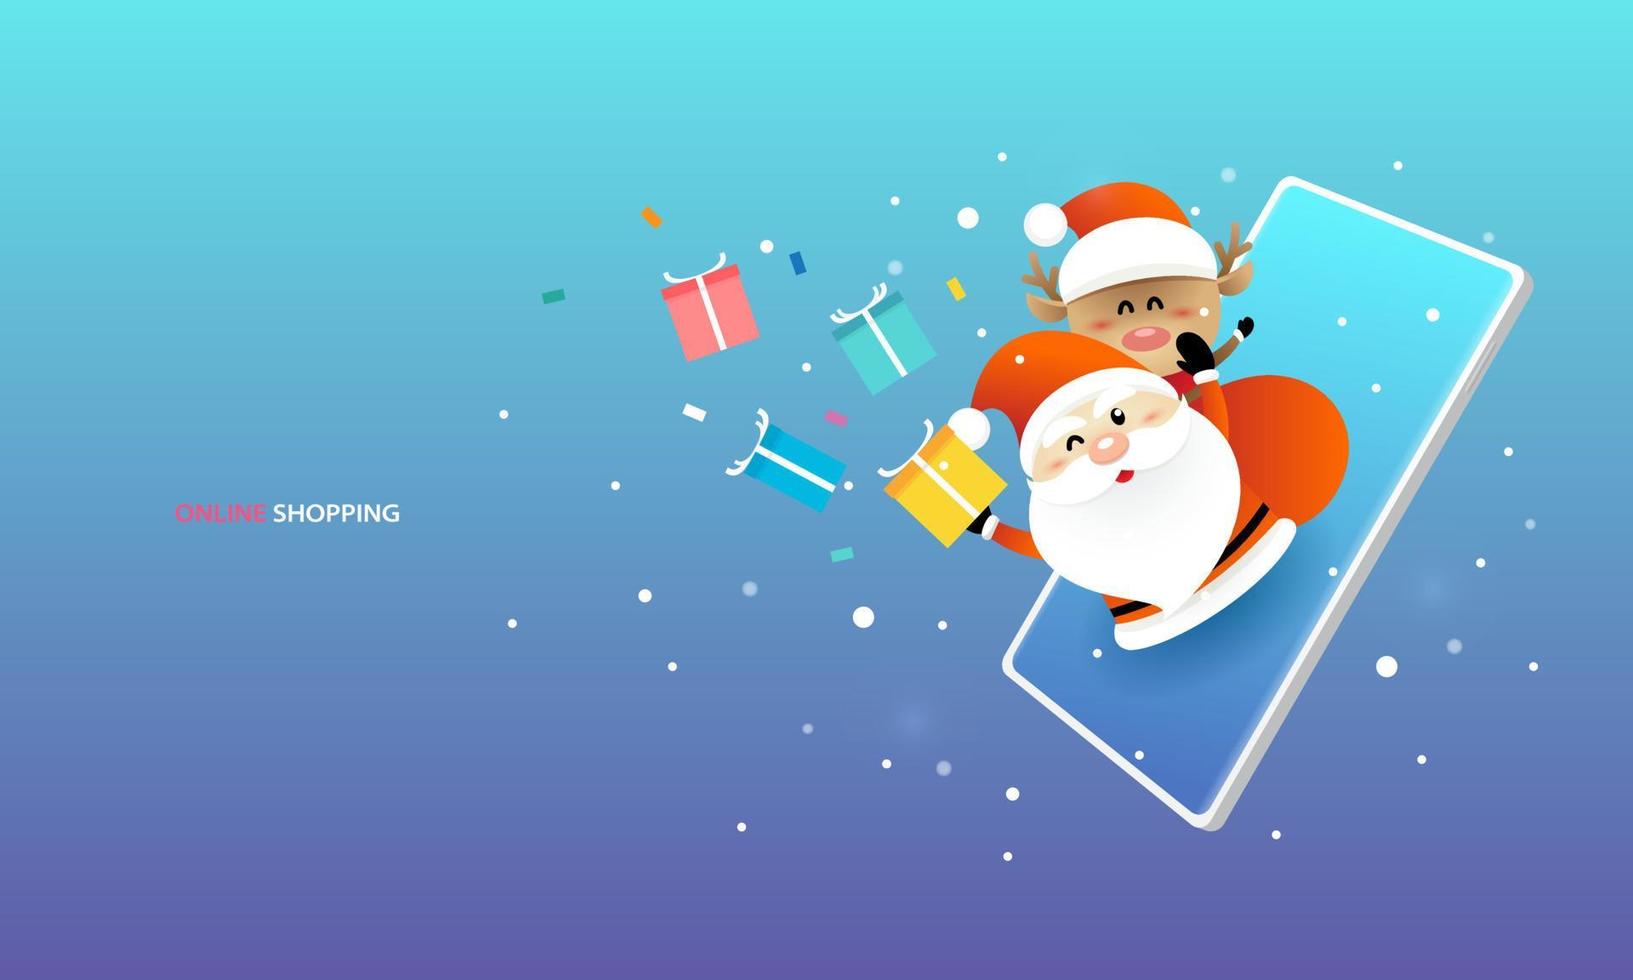 Cartoon Santa Claus, rendeer and gifts with Christmas sale time for gifts. Online shopping on smartphone, cellphone or mobile concept for web banners, web sites. Online business template. vector